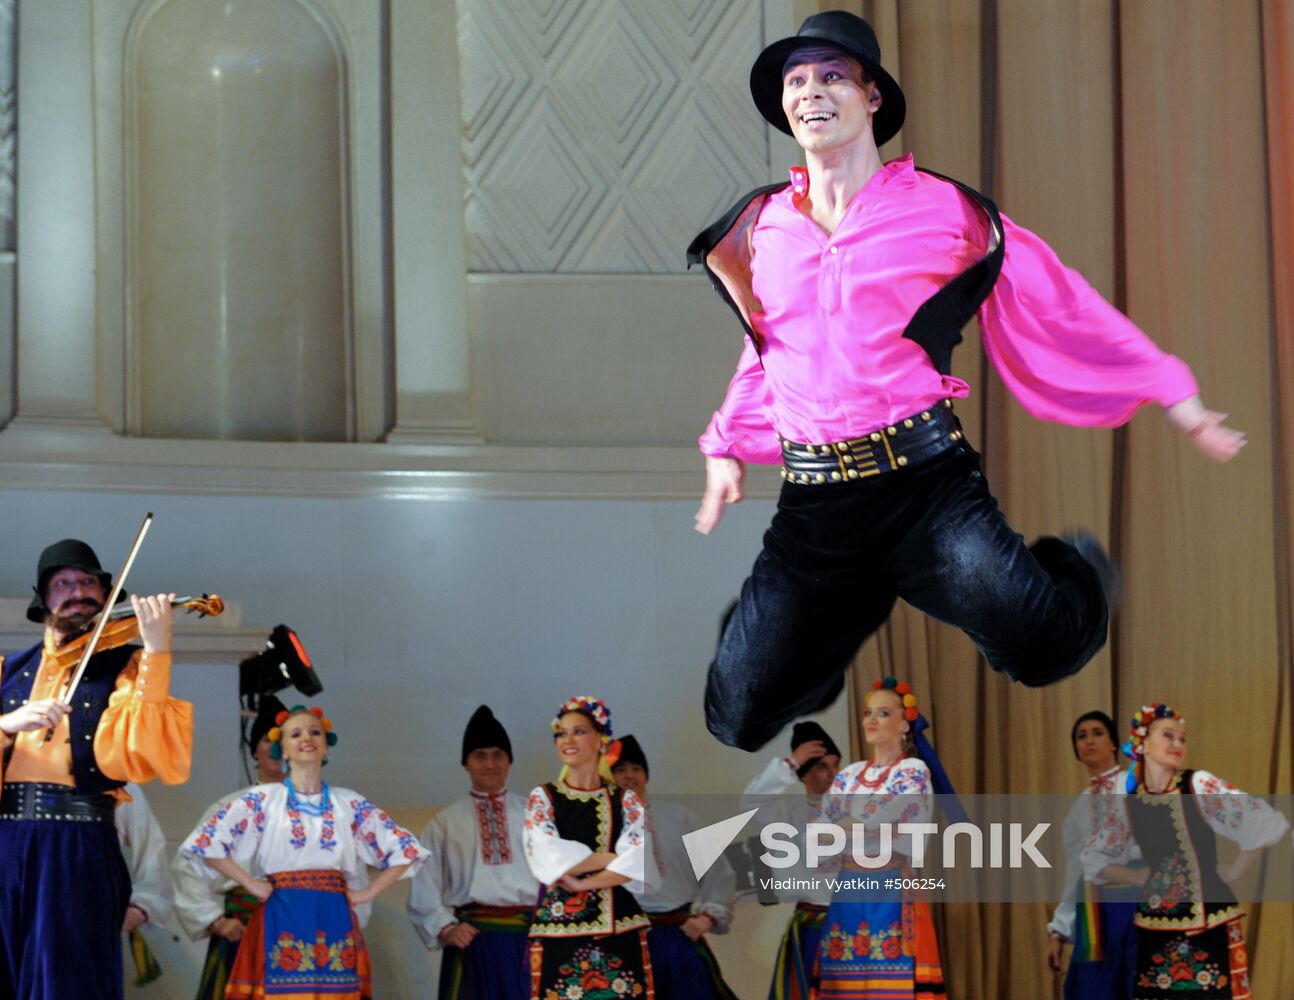 Night on Bald Mountain ballet performed by Moiseyev company